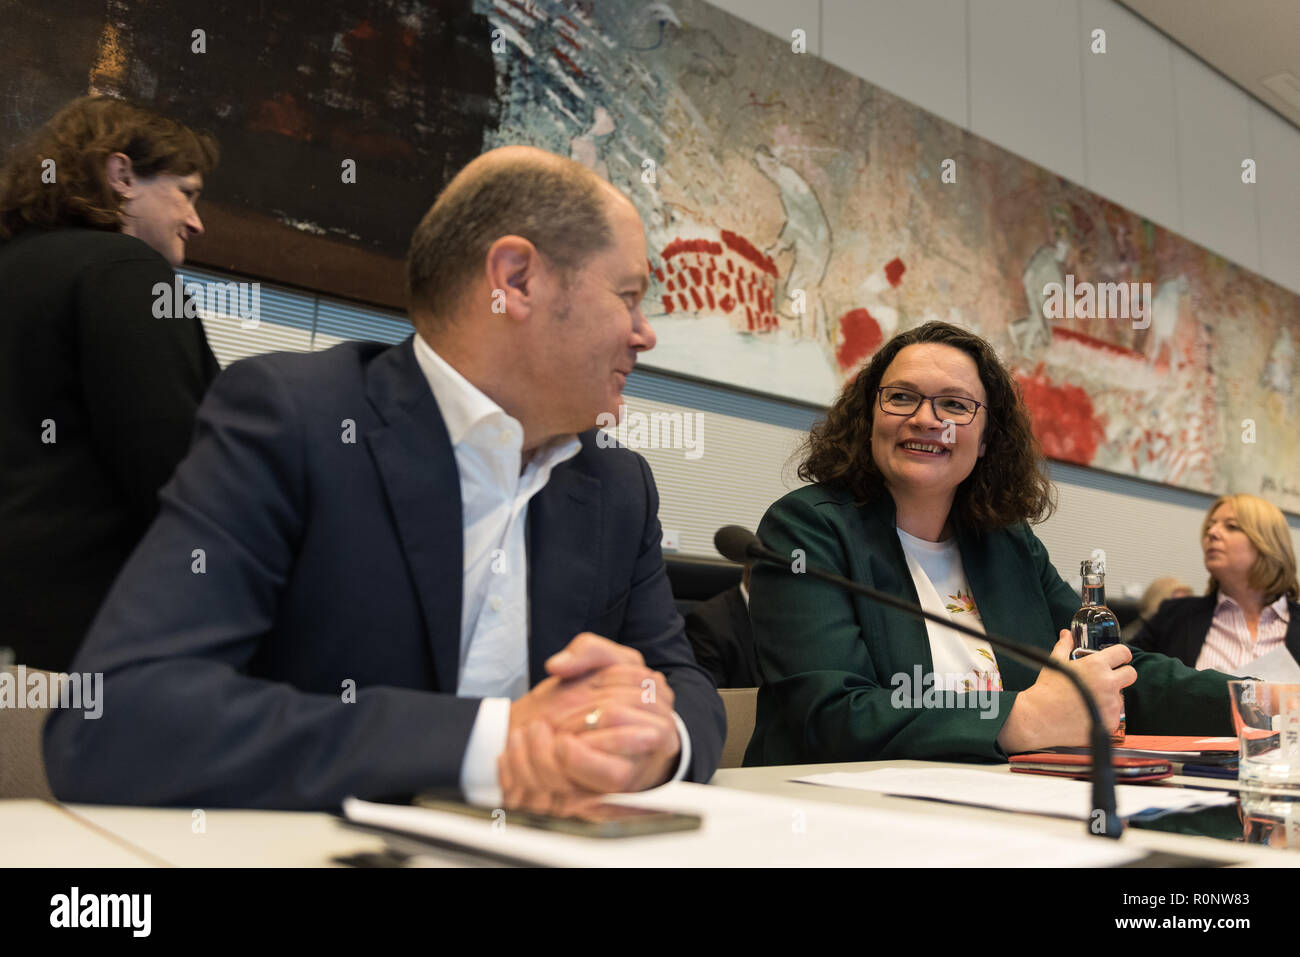 The leader of the Social Democratic Party (R, SPD) Andrea Nahles talks to Federal Minister of Finance, Olaf Scholz of the Social Democratic Party (SPD) before the SPD faction meeting. Stock Photo